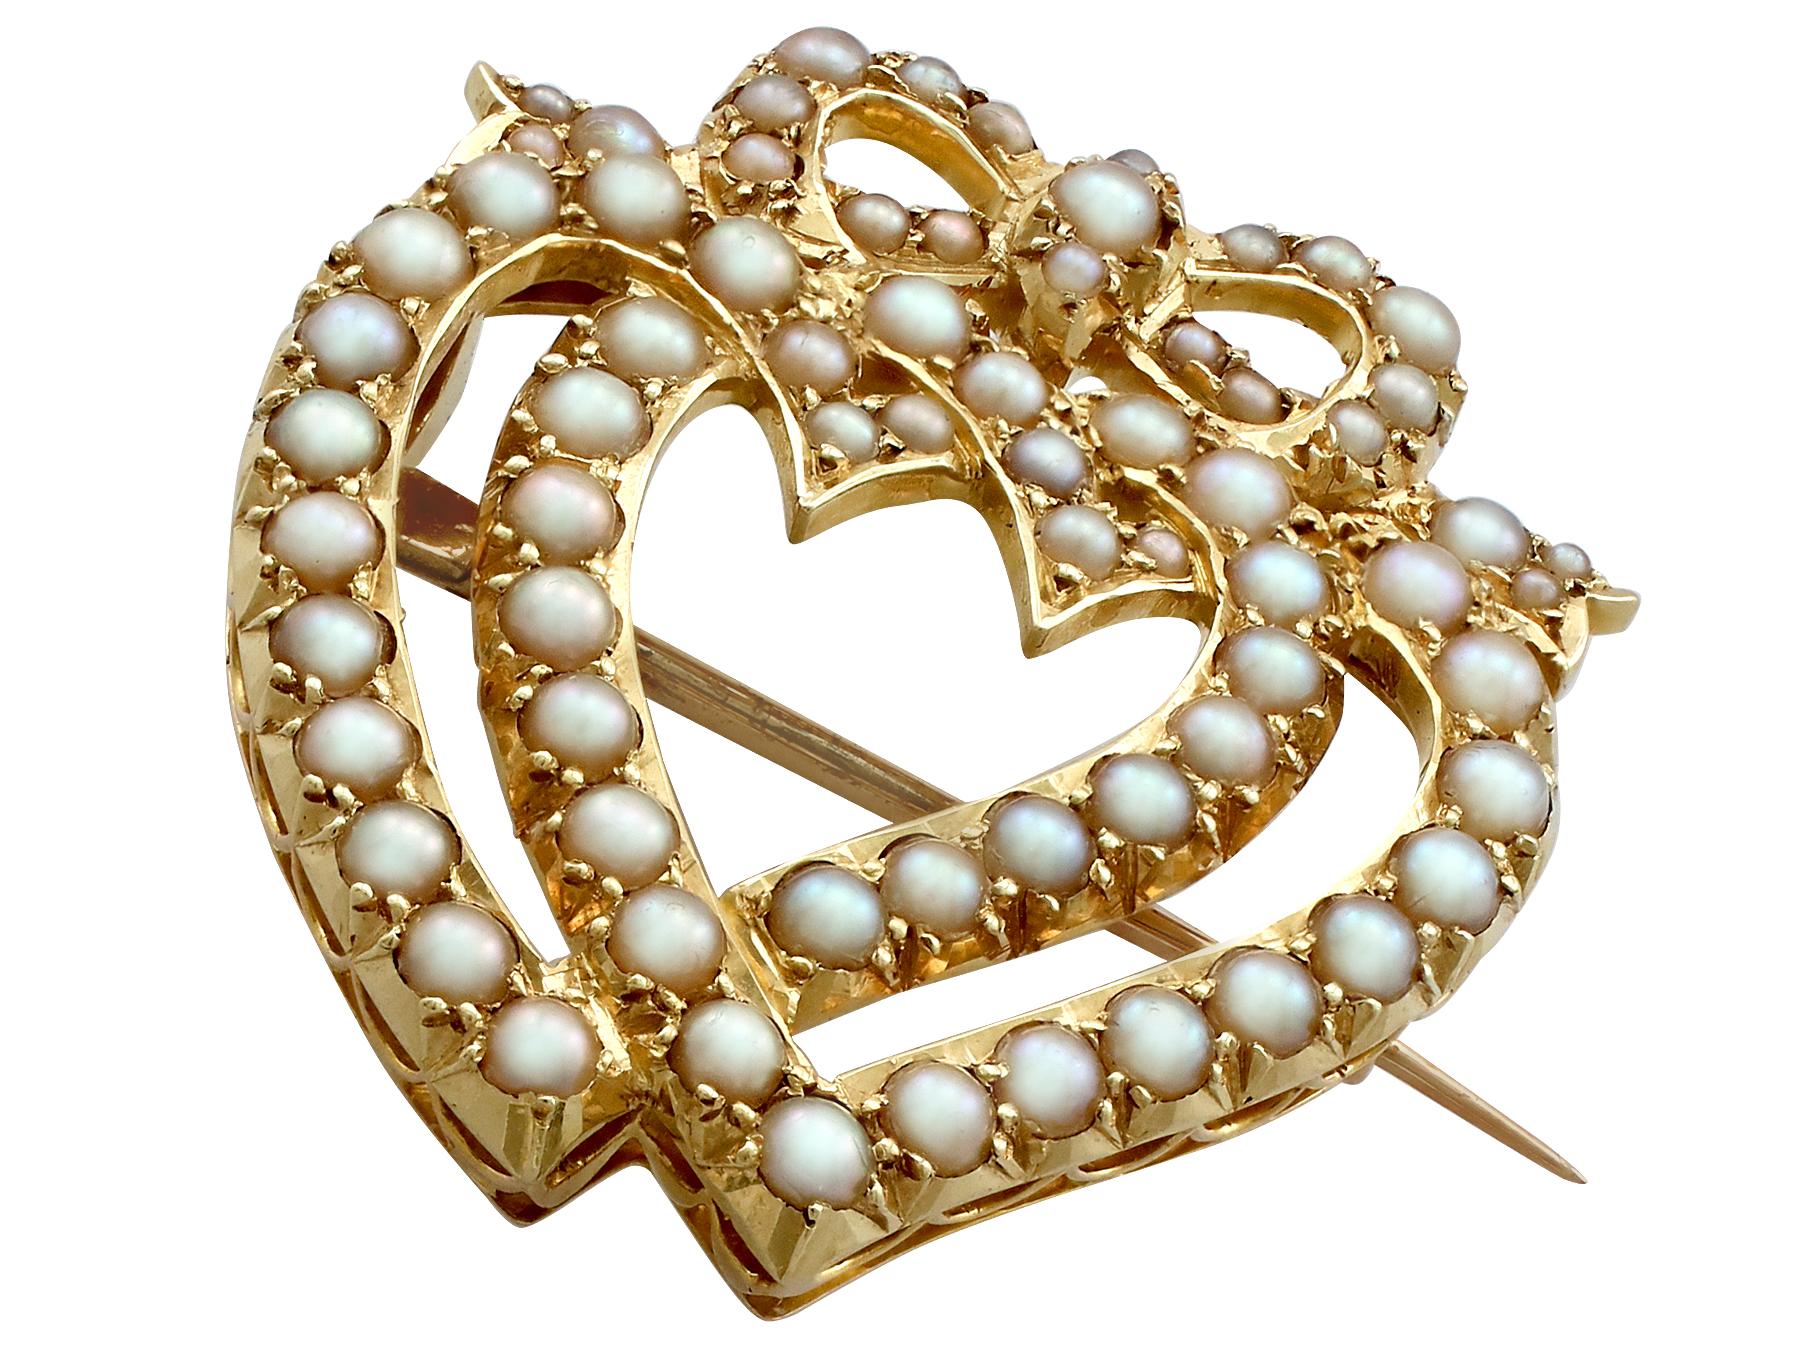 A fine and impressive seed pearl and 18 karat yellow gold heart shaped brooch; part of our diverse antique jewelry and estate jewelry collections.

This impressive large antique heart shaped brooch has been crafted in 18 karat yellow gold.

The